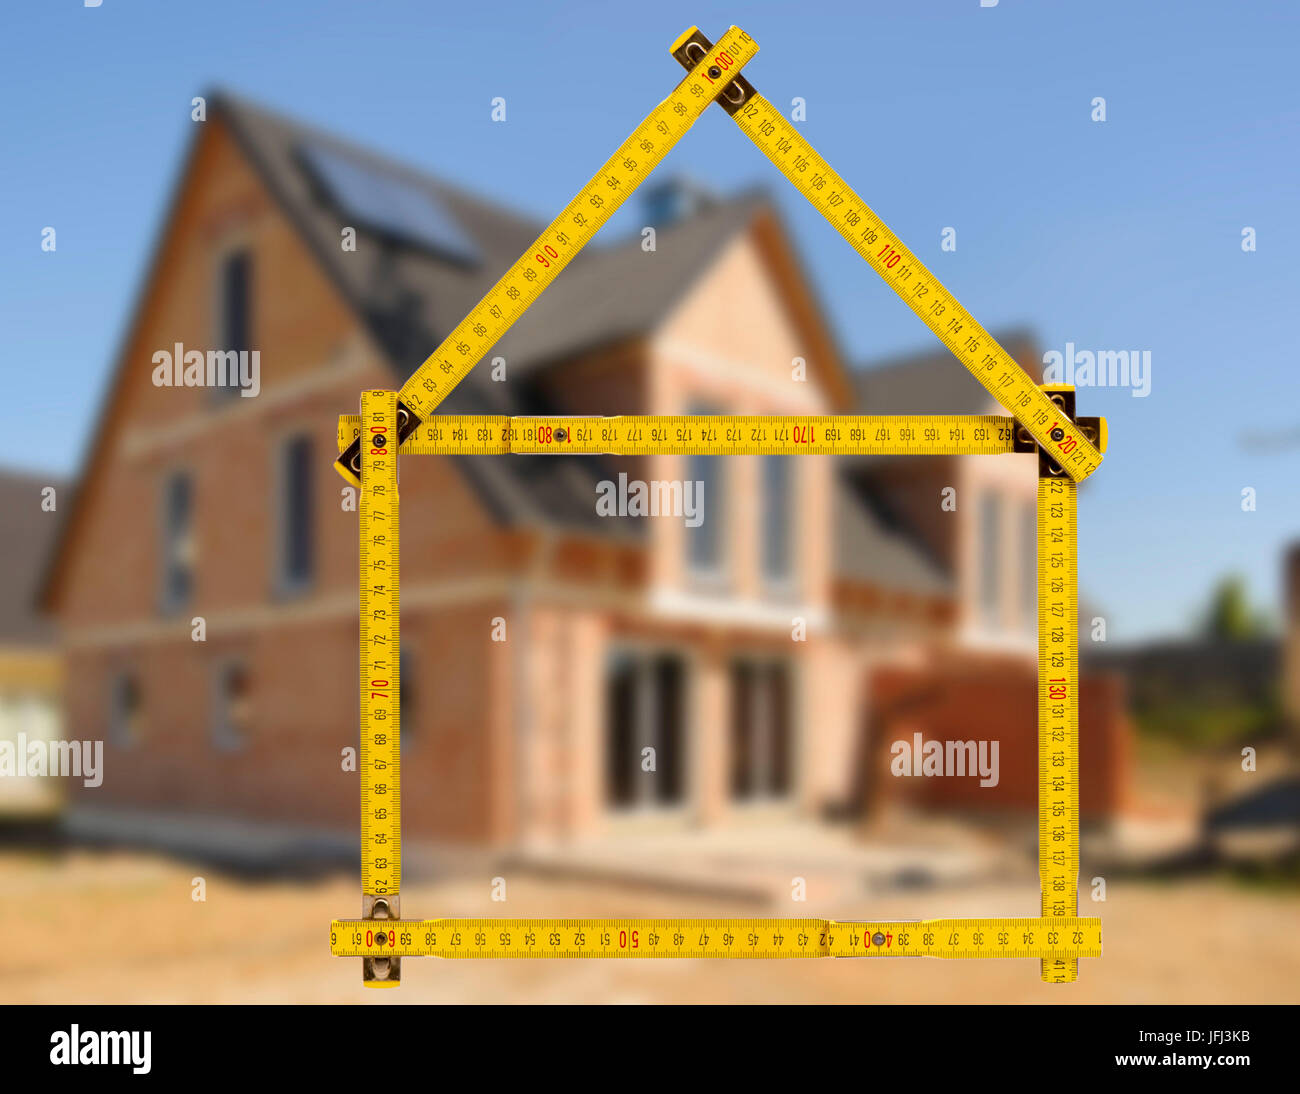 Building of a house and sales with yard stick as an icon Stock Photo